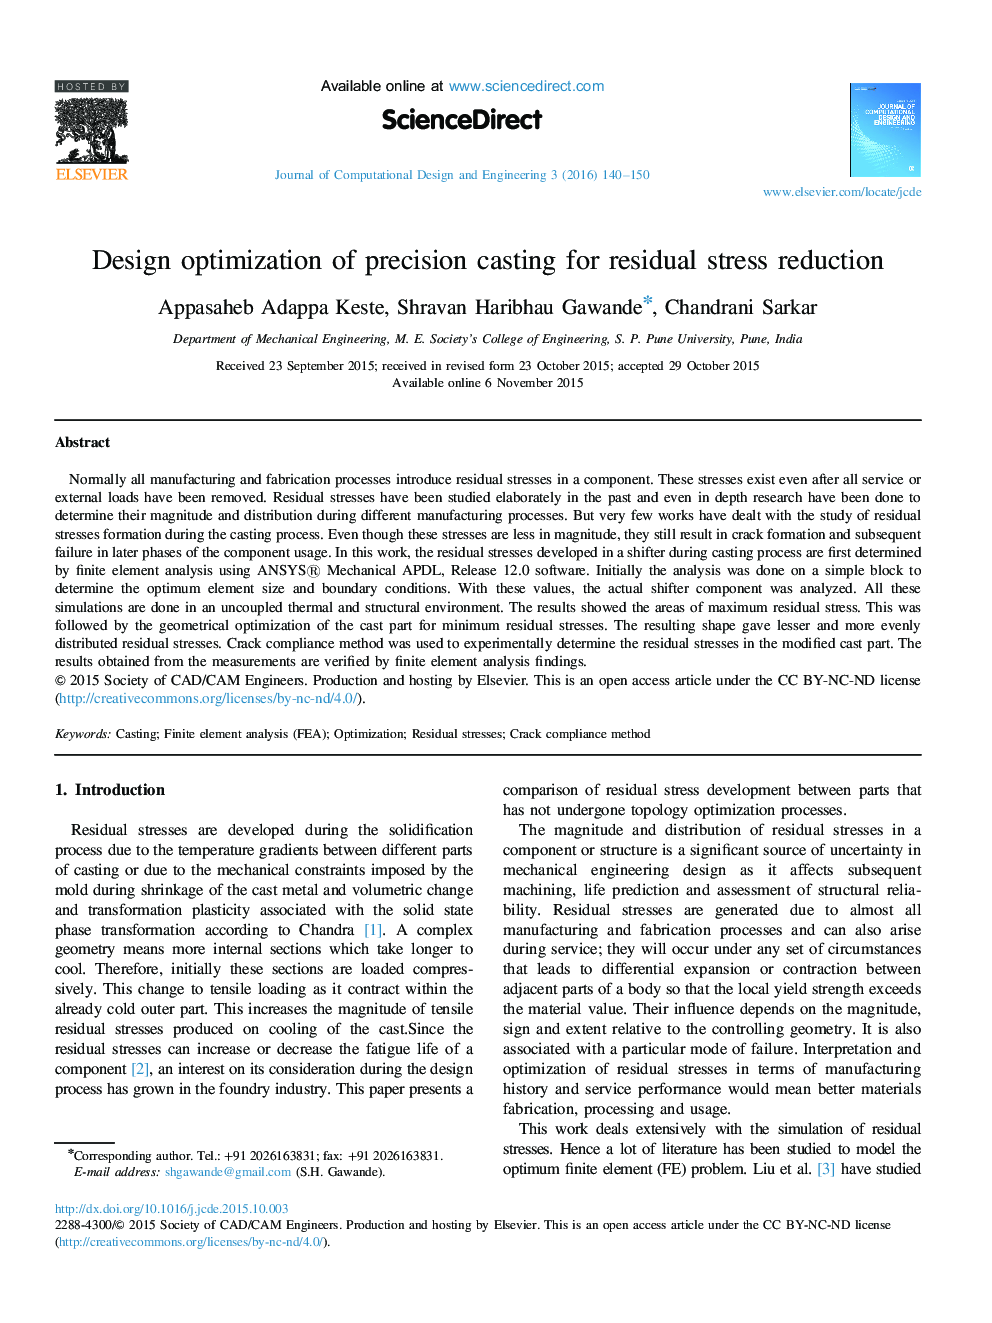 Design optimization of precision casting for residual stress reduction